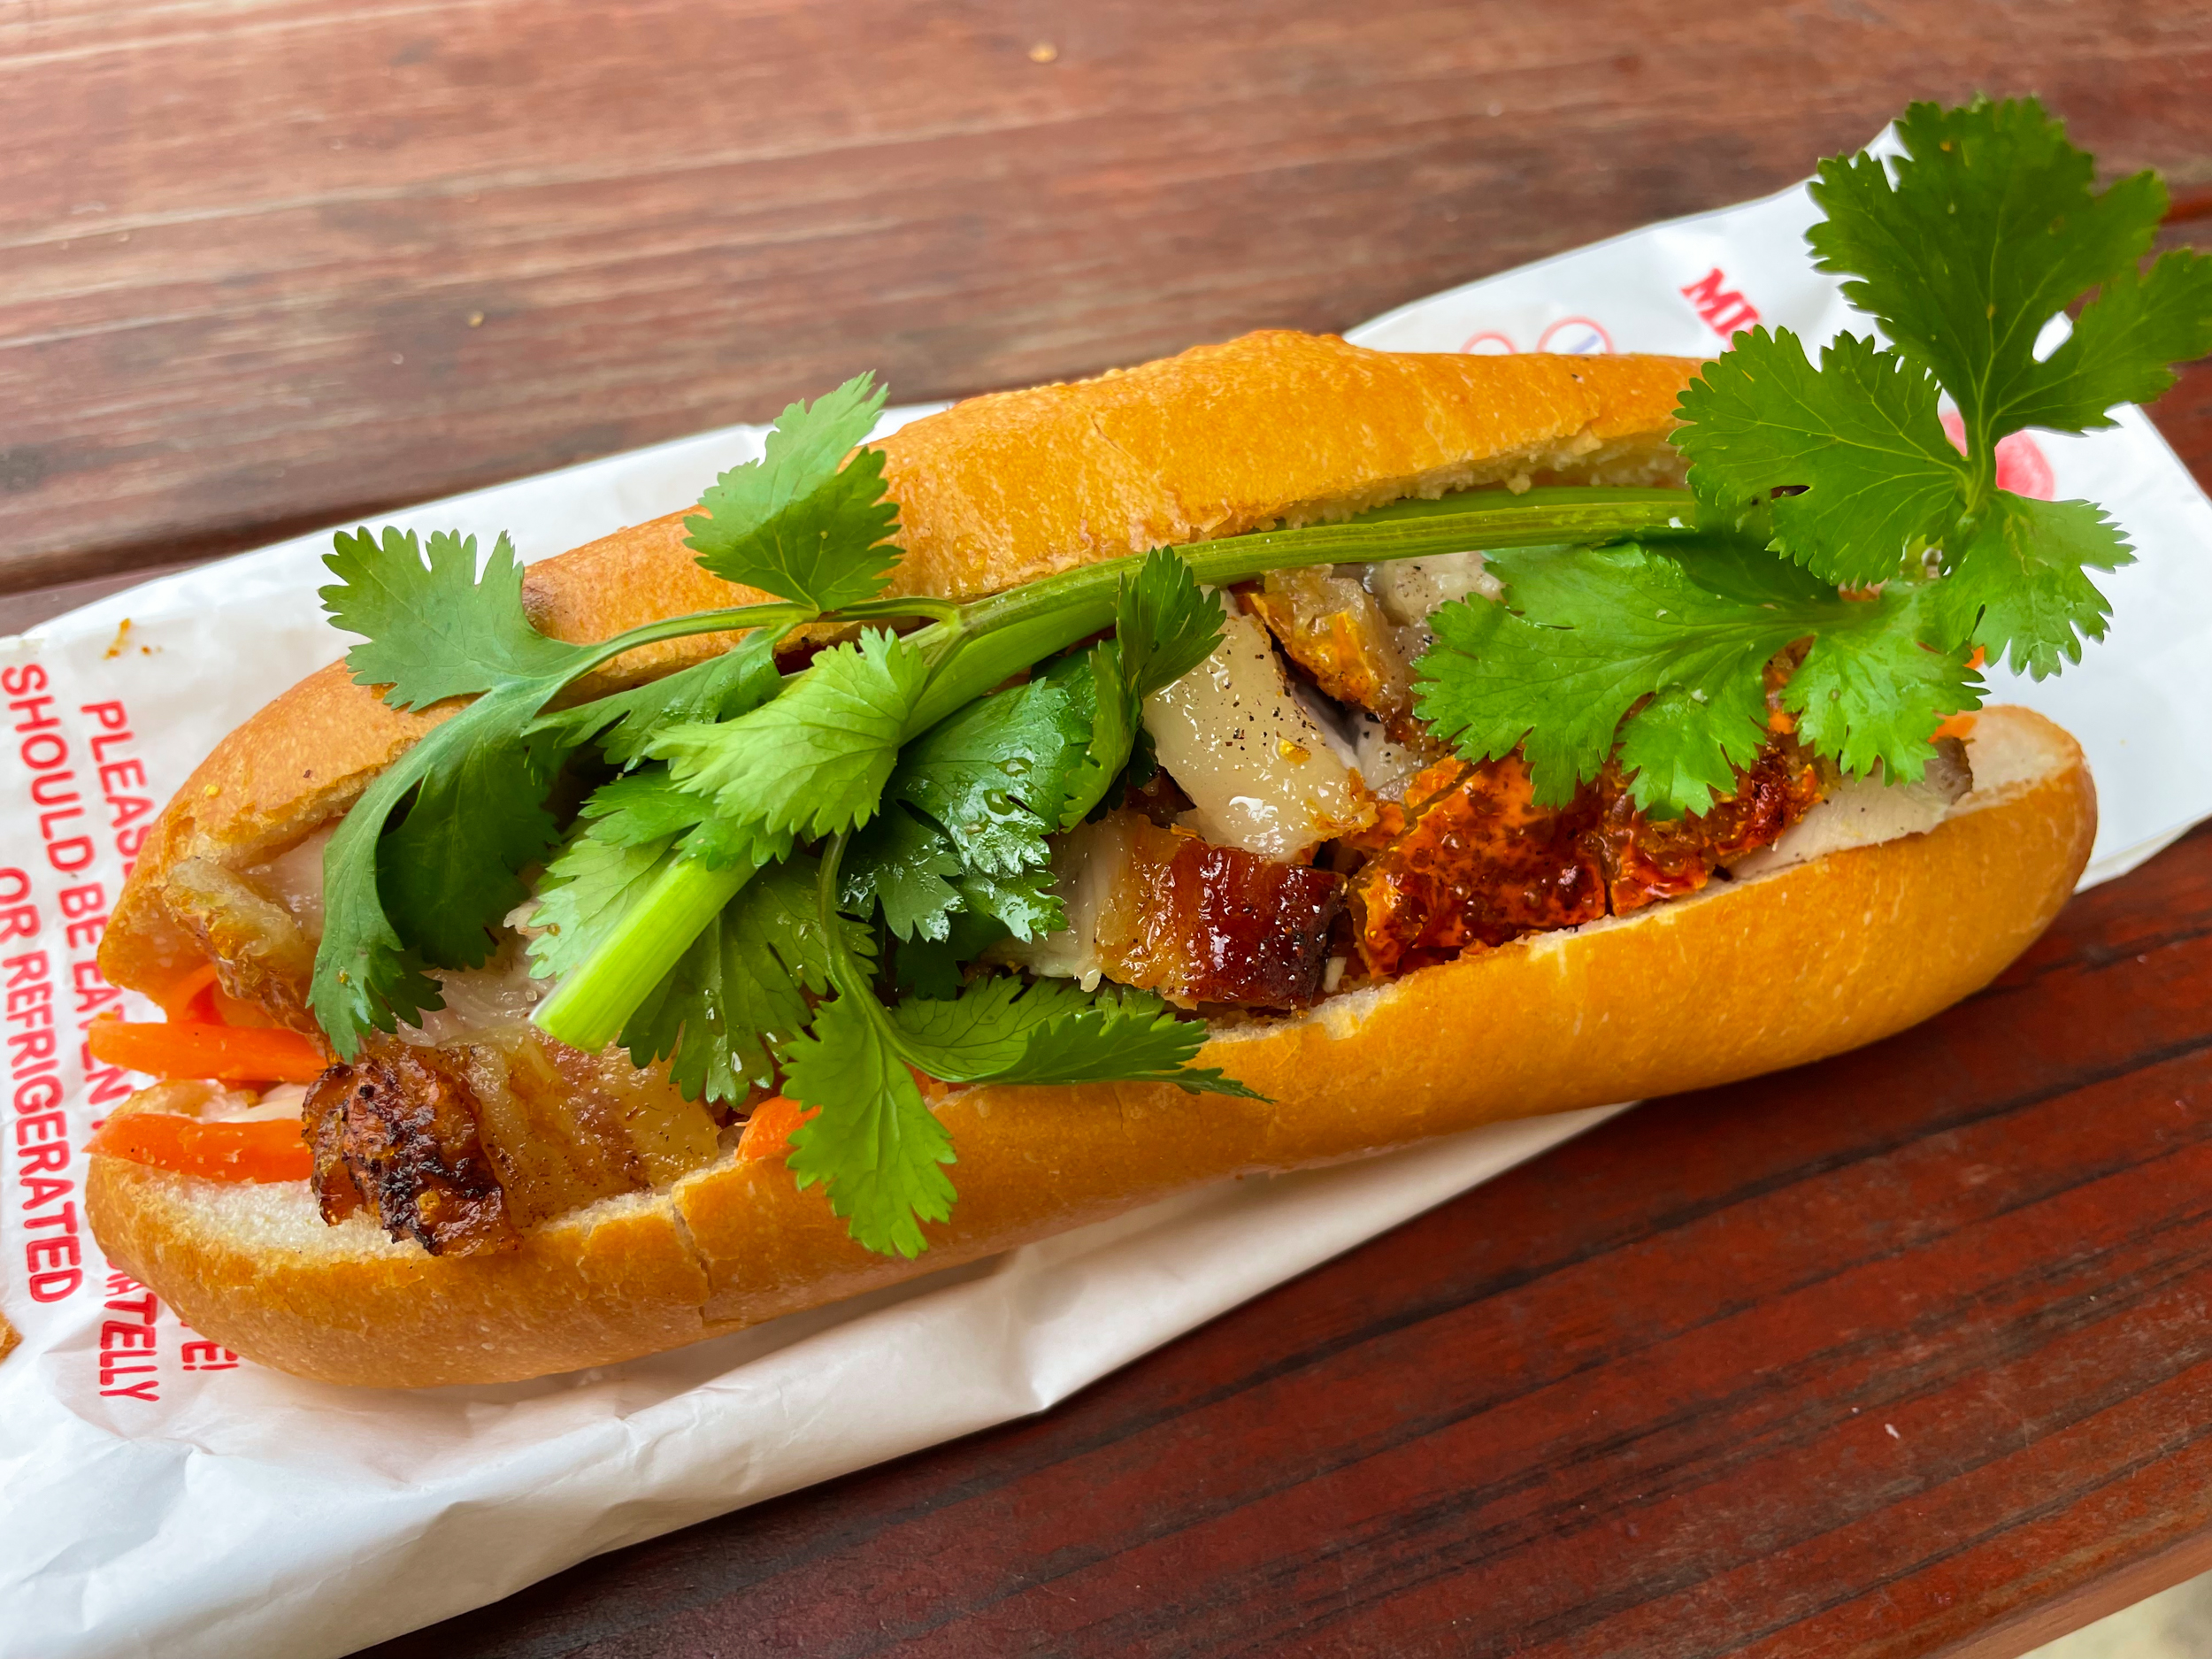 Banh mi bread roll with pork, coriander, and other fillings inside. Sitting on paper bag on table